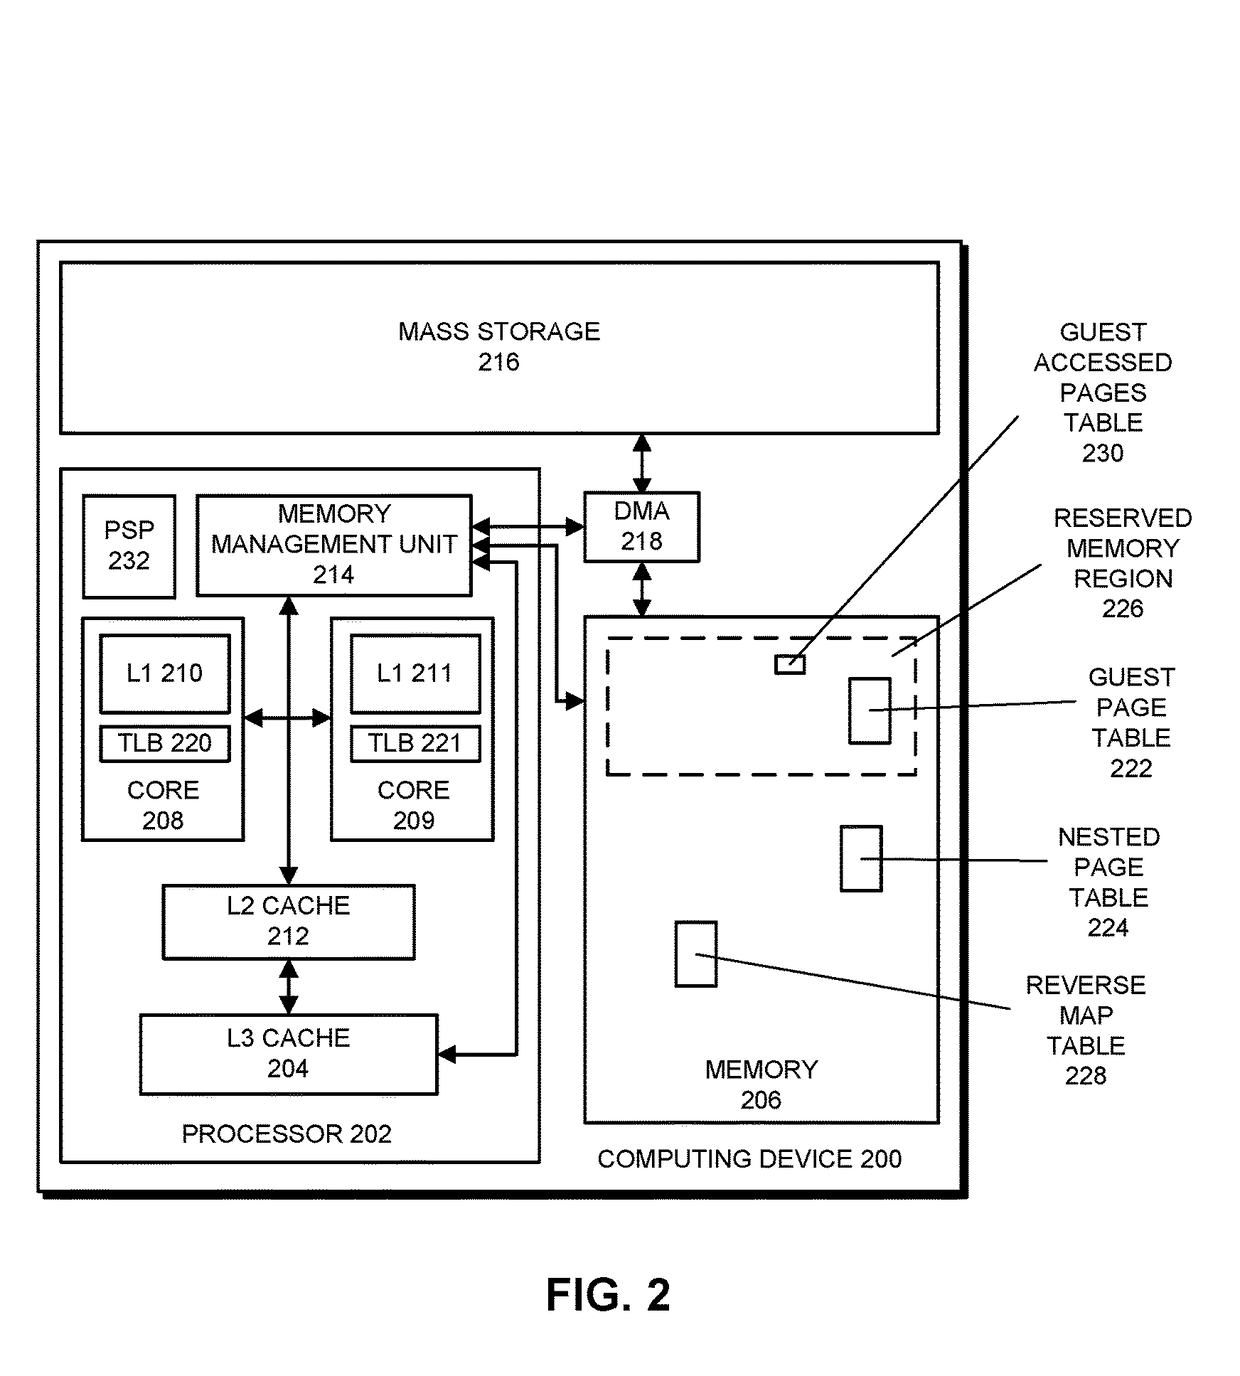 Controlling Access to Pages in a Memory in a Computing Device